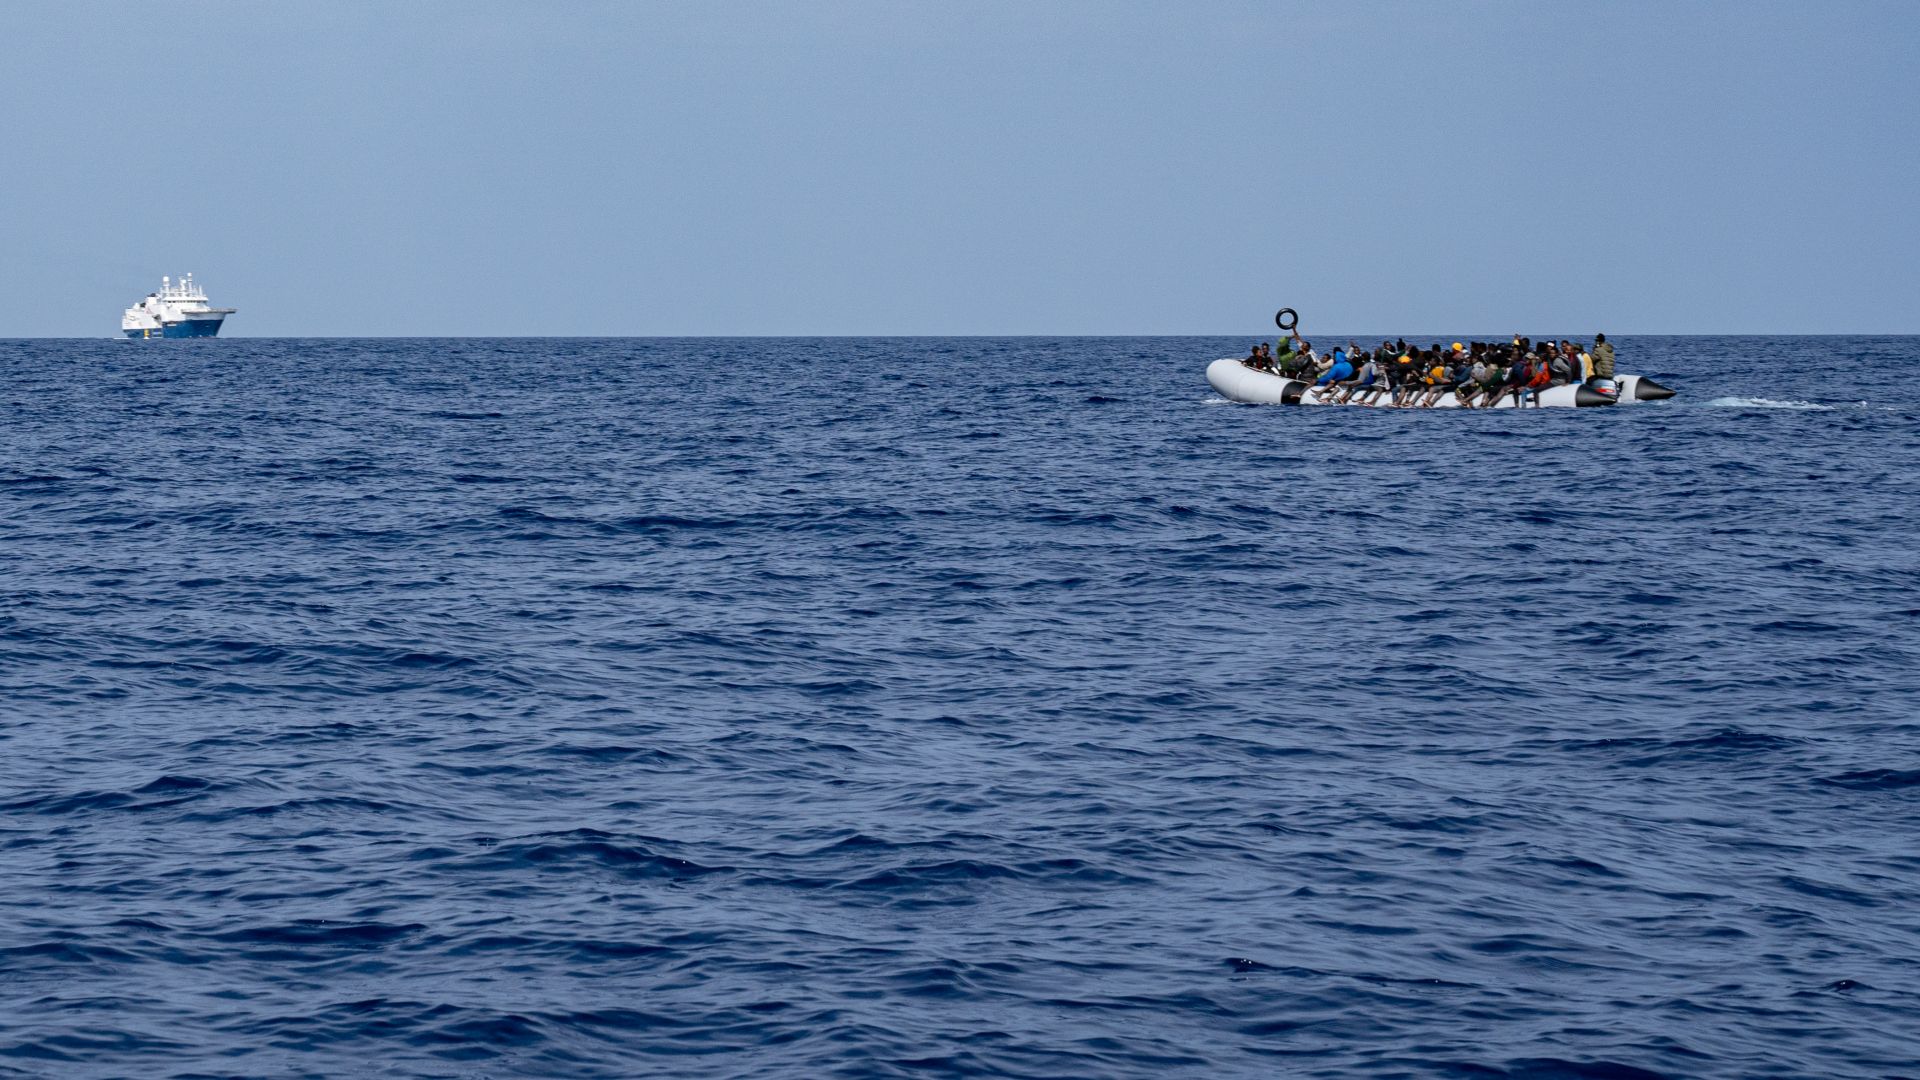 An inflatable boat with over 100 people onboard floats in the Med sea